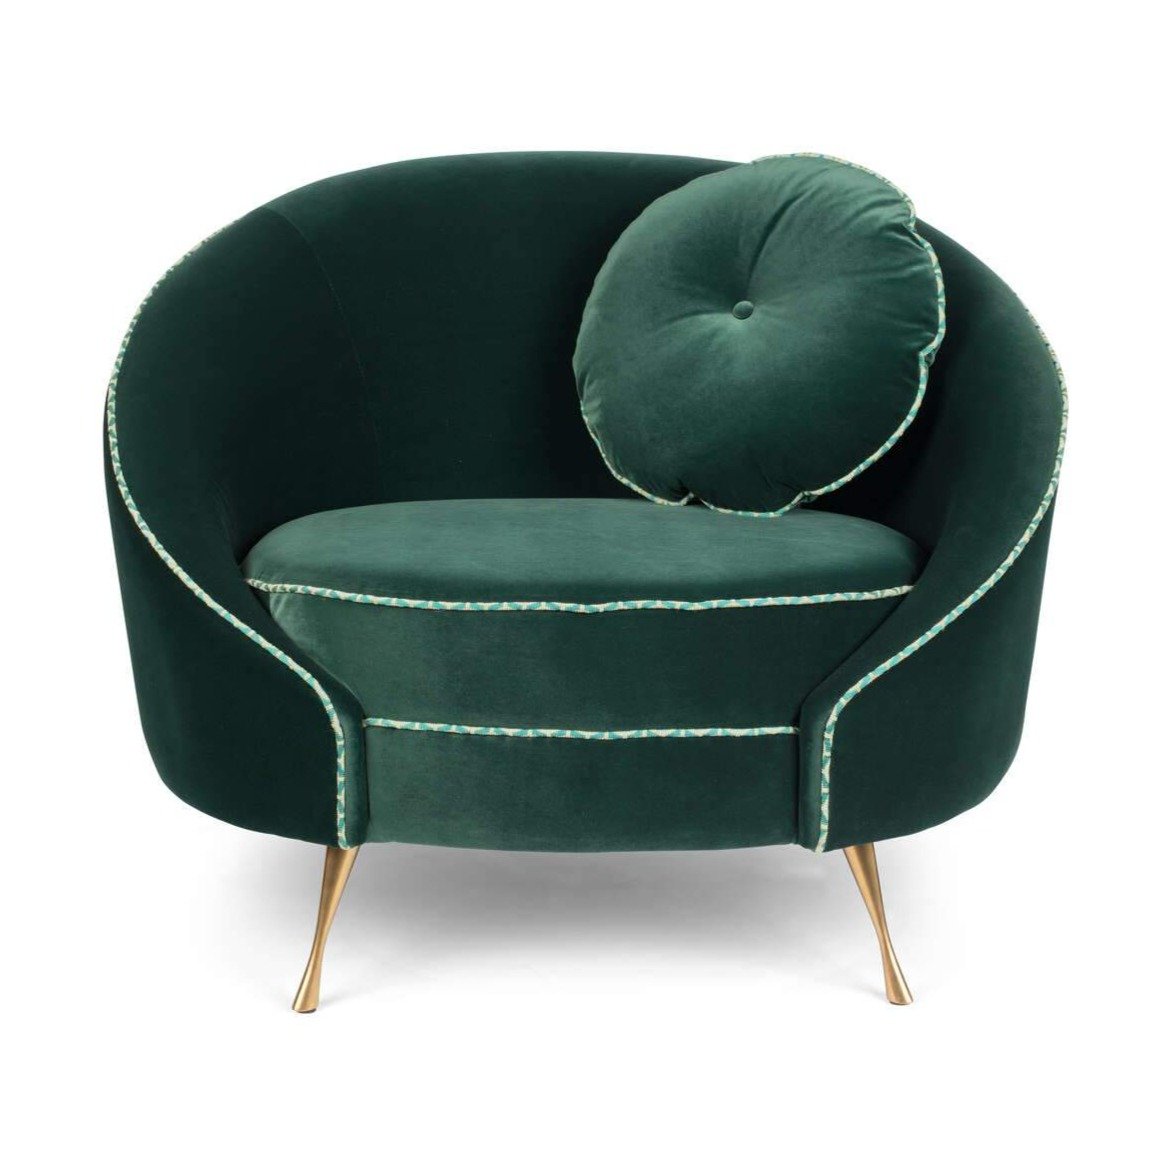 The perfect size for cozy salons or as a stylish addition to larger rooms, this armchair is versatile. The brave Monkey Don't Love Me seat may not love you, but you will definitely fall in love with it. Don't say we didn't warn you.